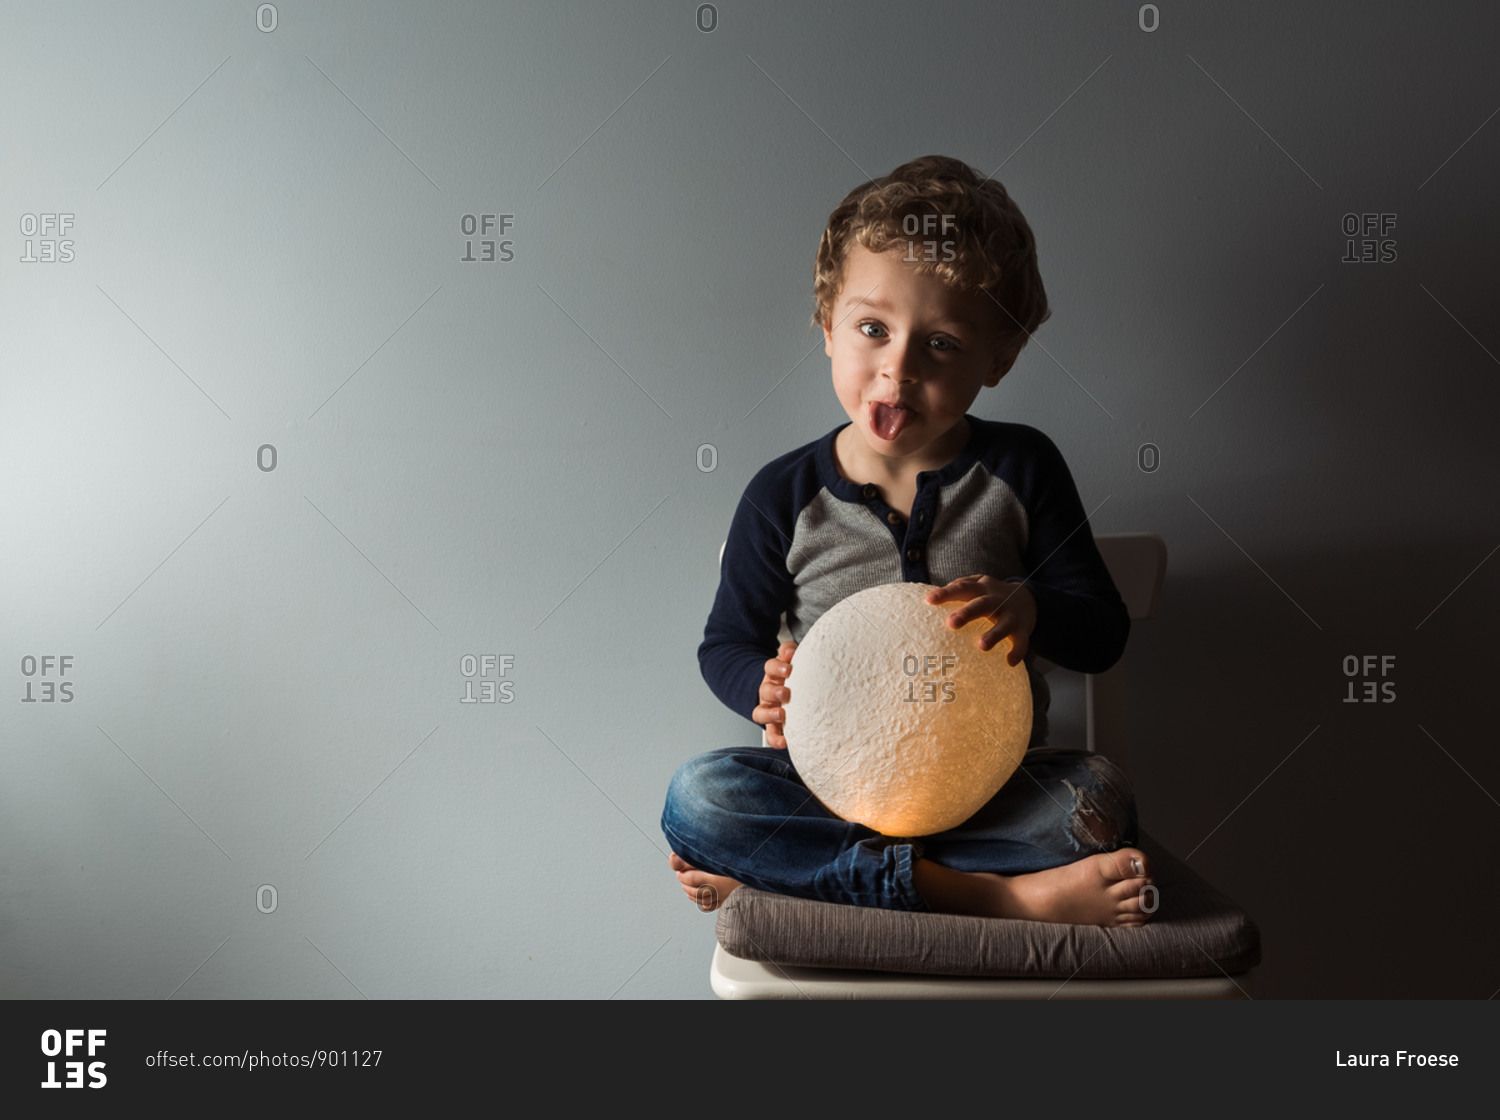 Young boy sticking tongue out while holding round moon lamp